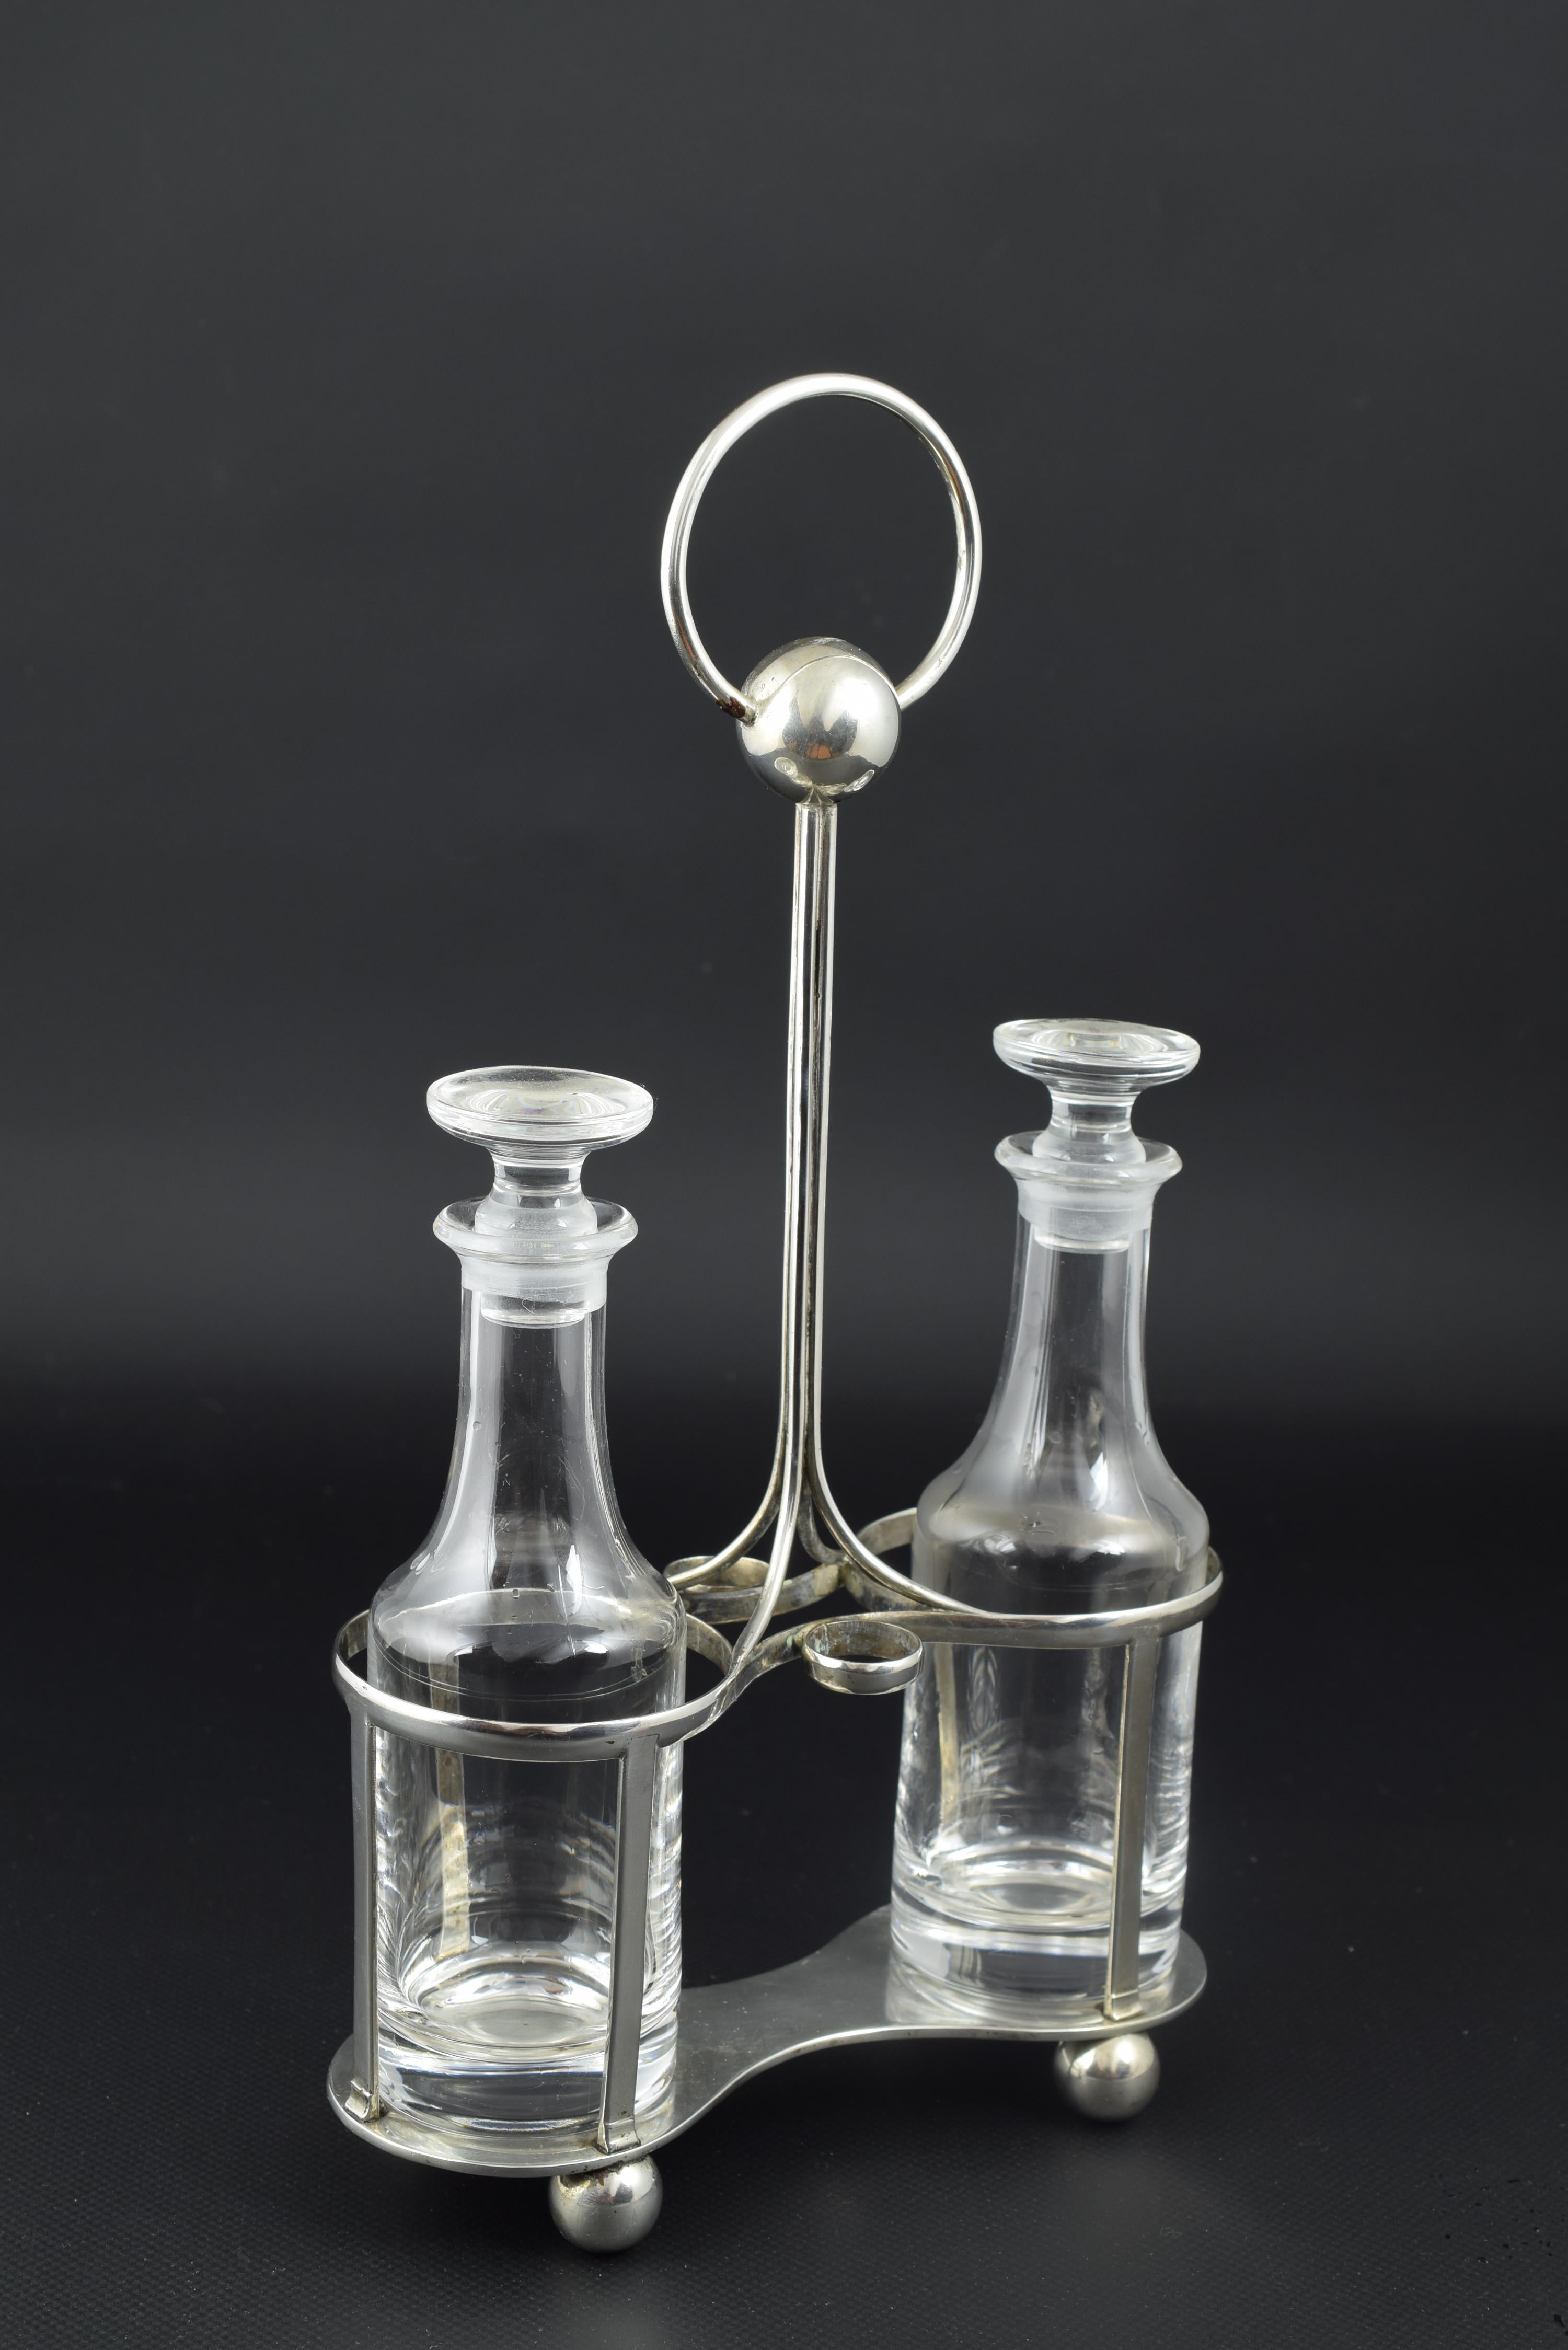 Cruet Convoy. Contrast by García Calvo, Valladolid, 1900.
With contrast marks. Glass and silver.
Silver convoy formed by a base on large pearls and with a central axis topped by a ring and another ball.
The simplicity of lines brings the work